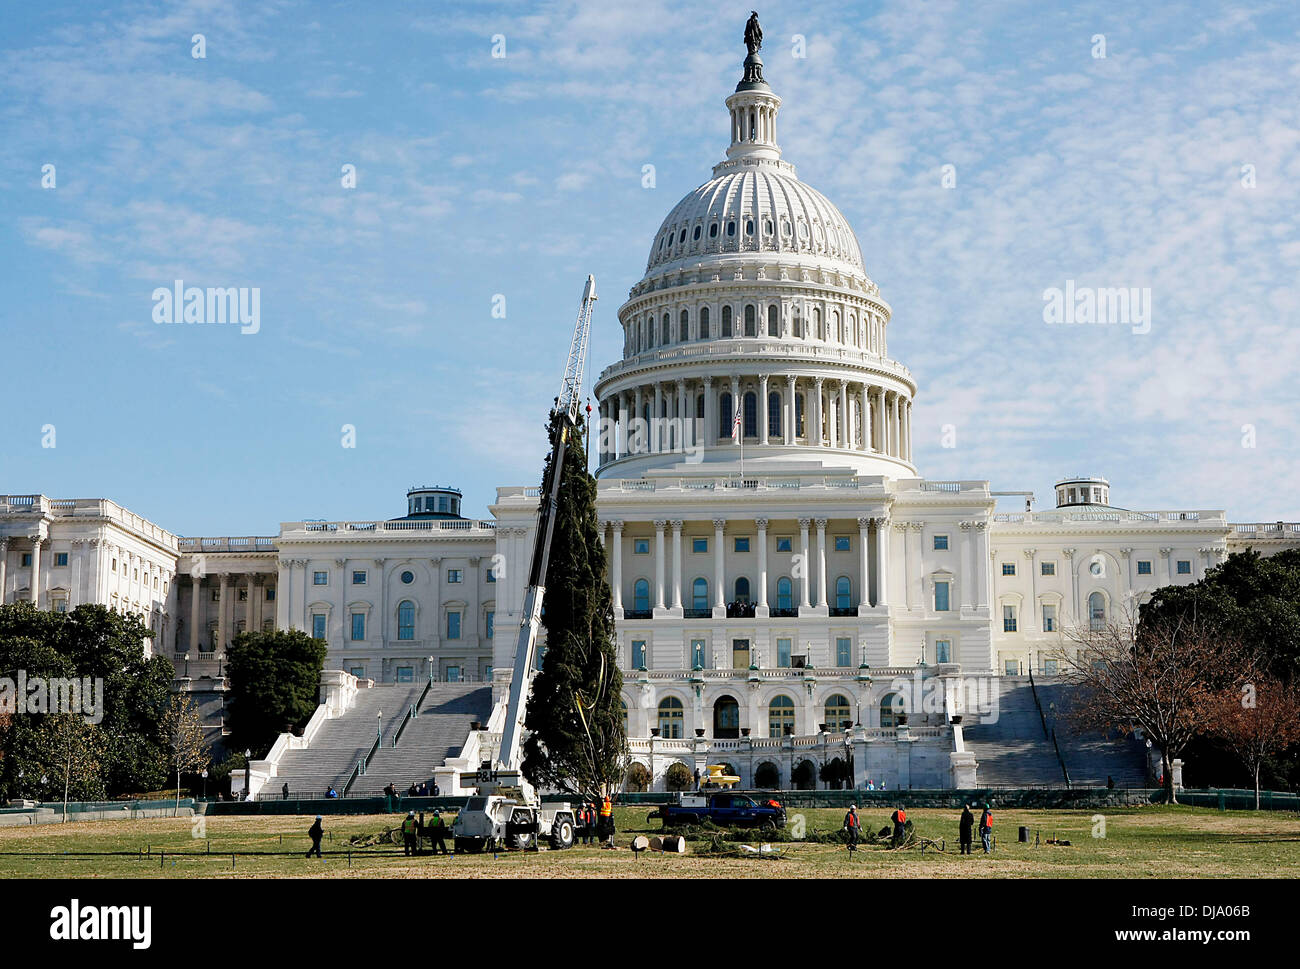 Washington DC, USA. 25th Nov, 2013. The 2013 Capitol Christmas Tree is seen planted into the west lawn of the U.S. Capitol in Washington DC on Nov. 25, 2013. The 2013 Capitol Christmas Tree, an 88-foot and 80-year-old Engelmann Spruce, was harvested from the Colville National Forest in Washington State on Nov. 1, 2013. Credit: Fang Zhe/Xinhua/Alamy Live News Stock Photo